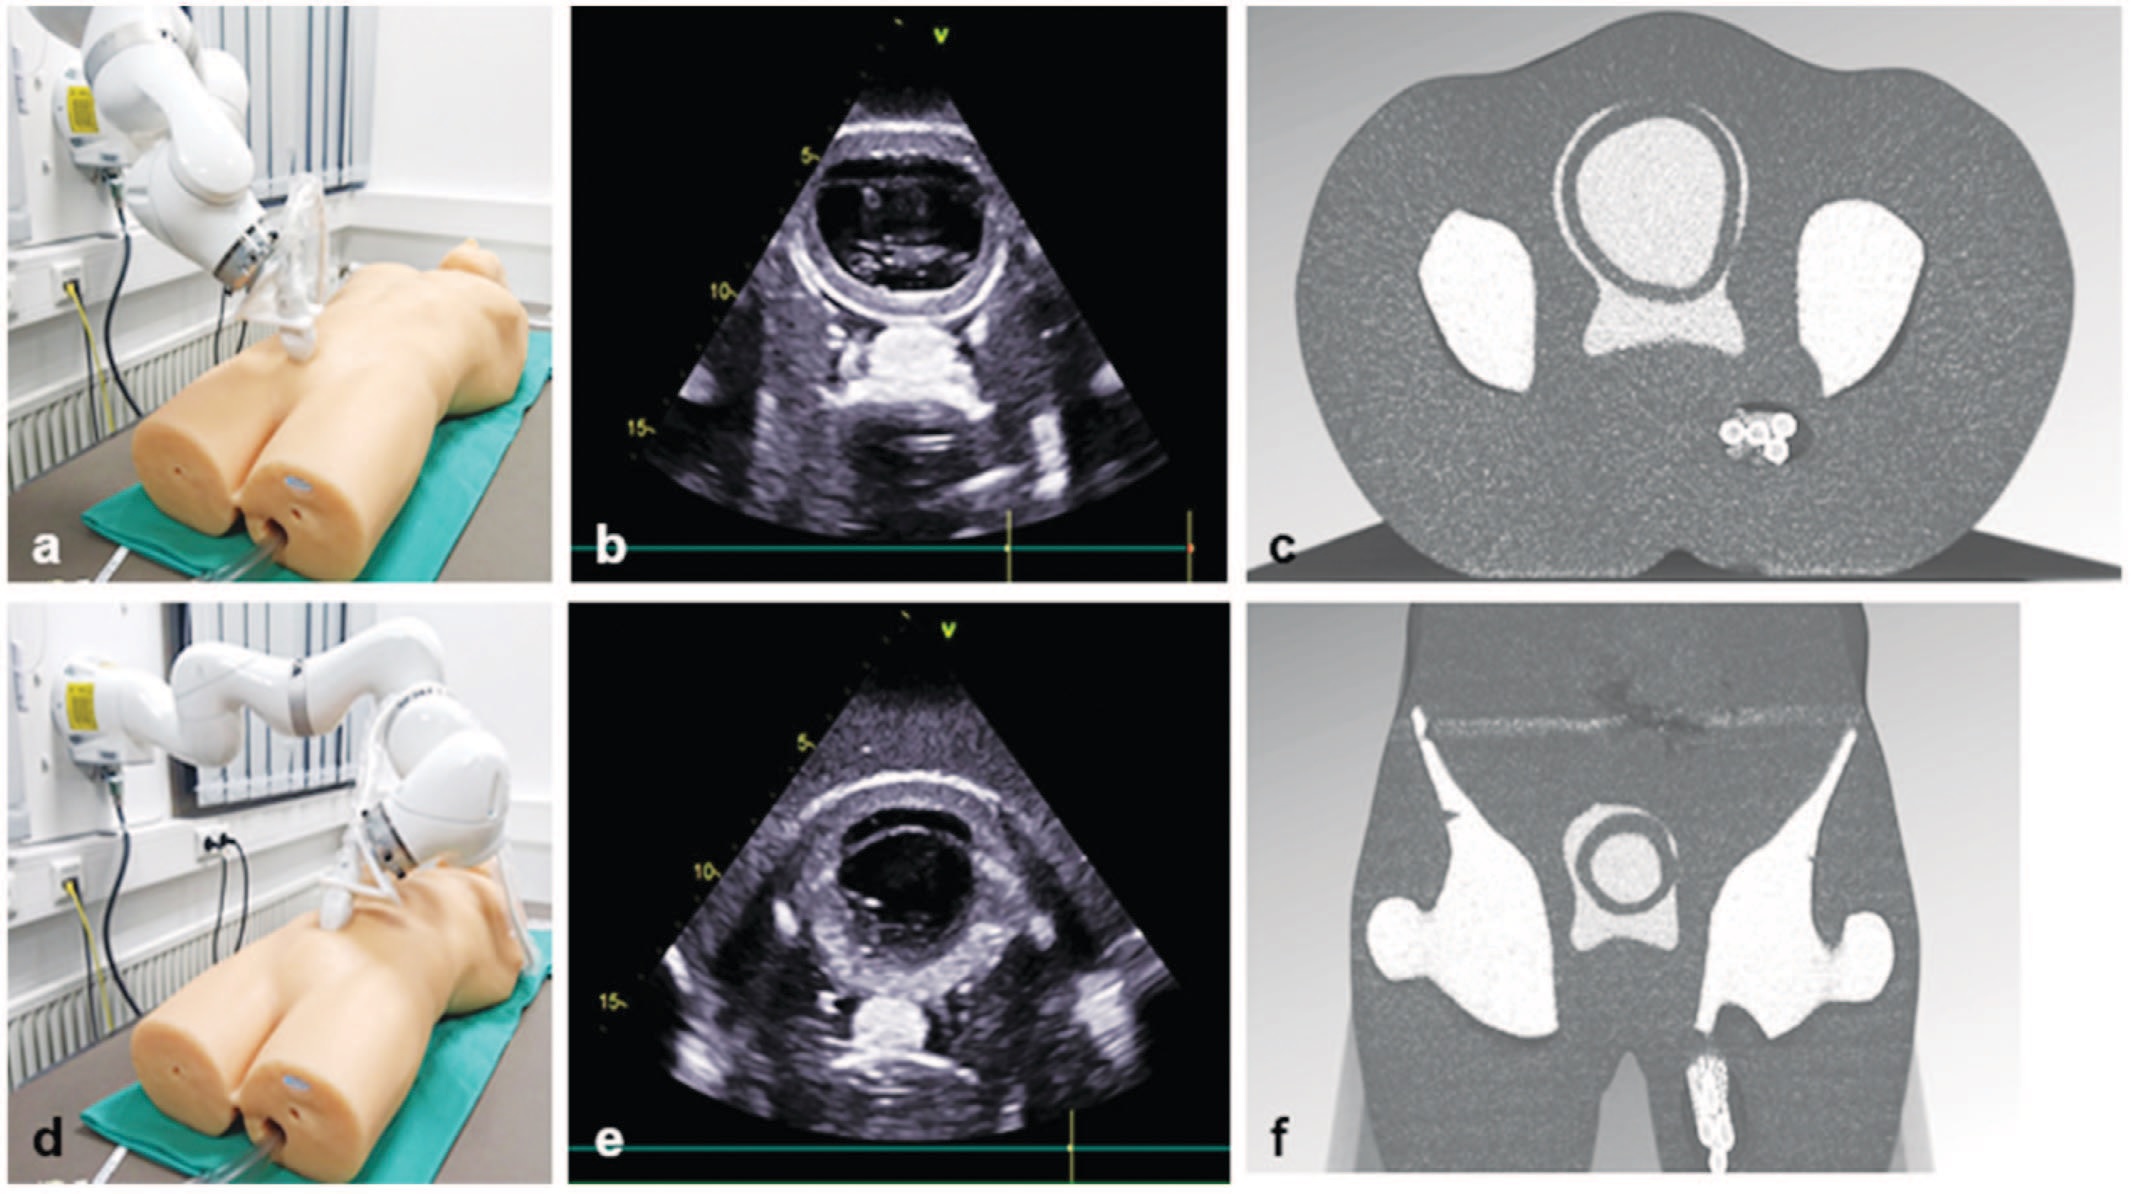 The use of an ultrasound robot for ultrasound-guided radiotherapy